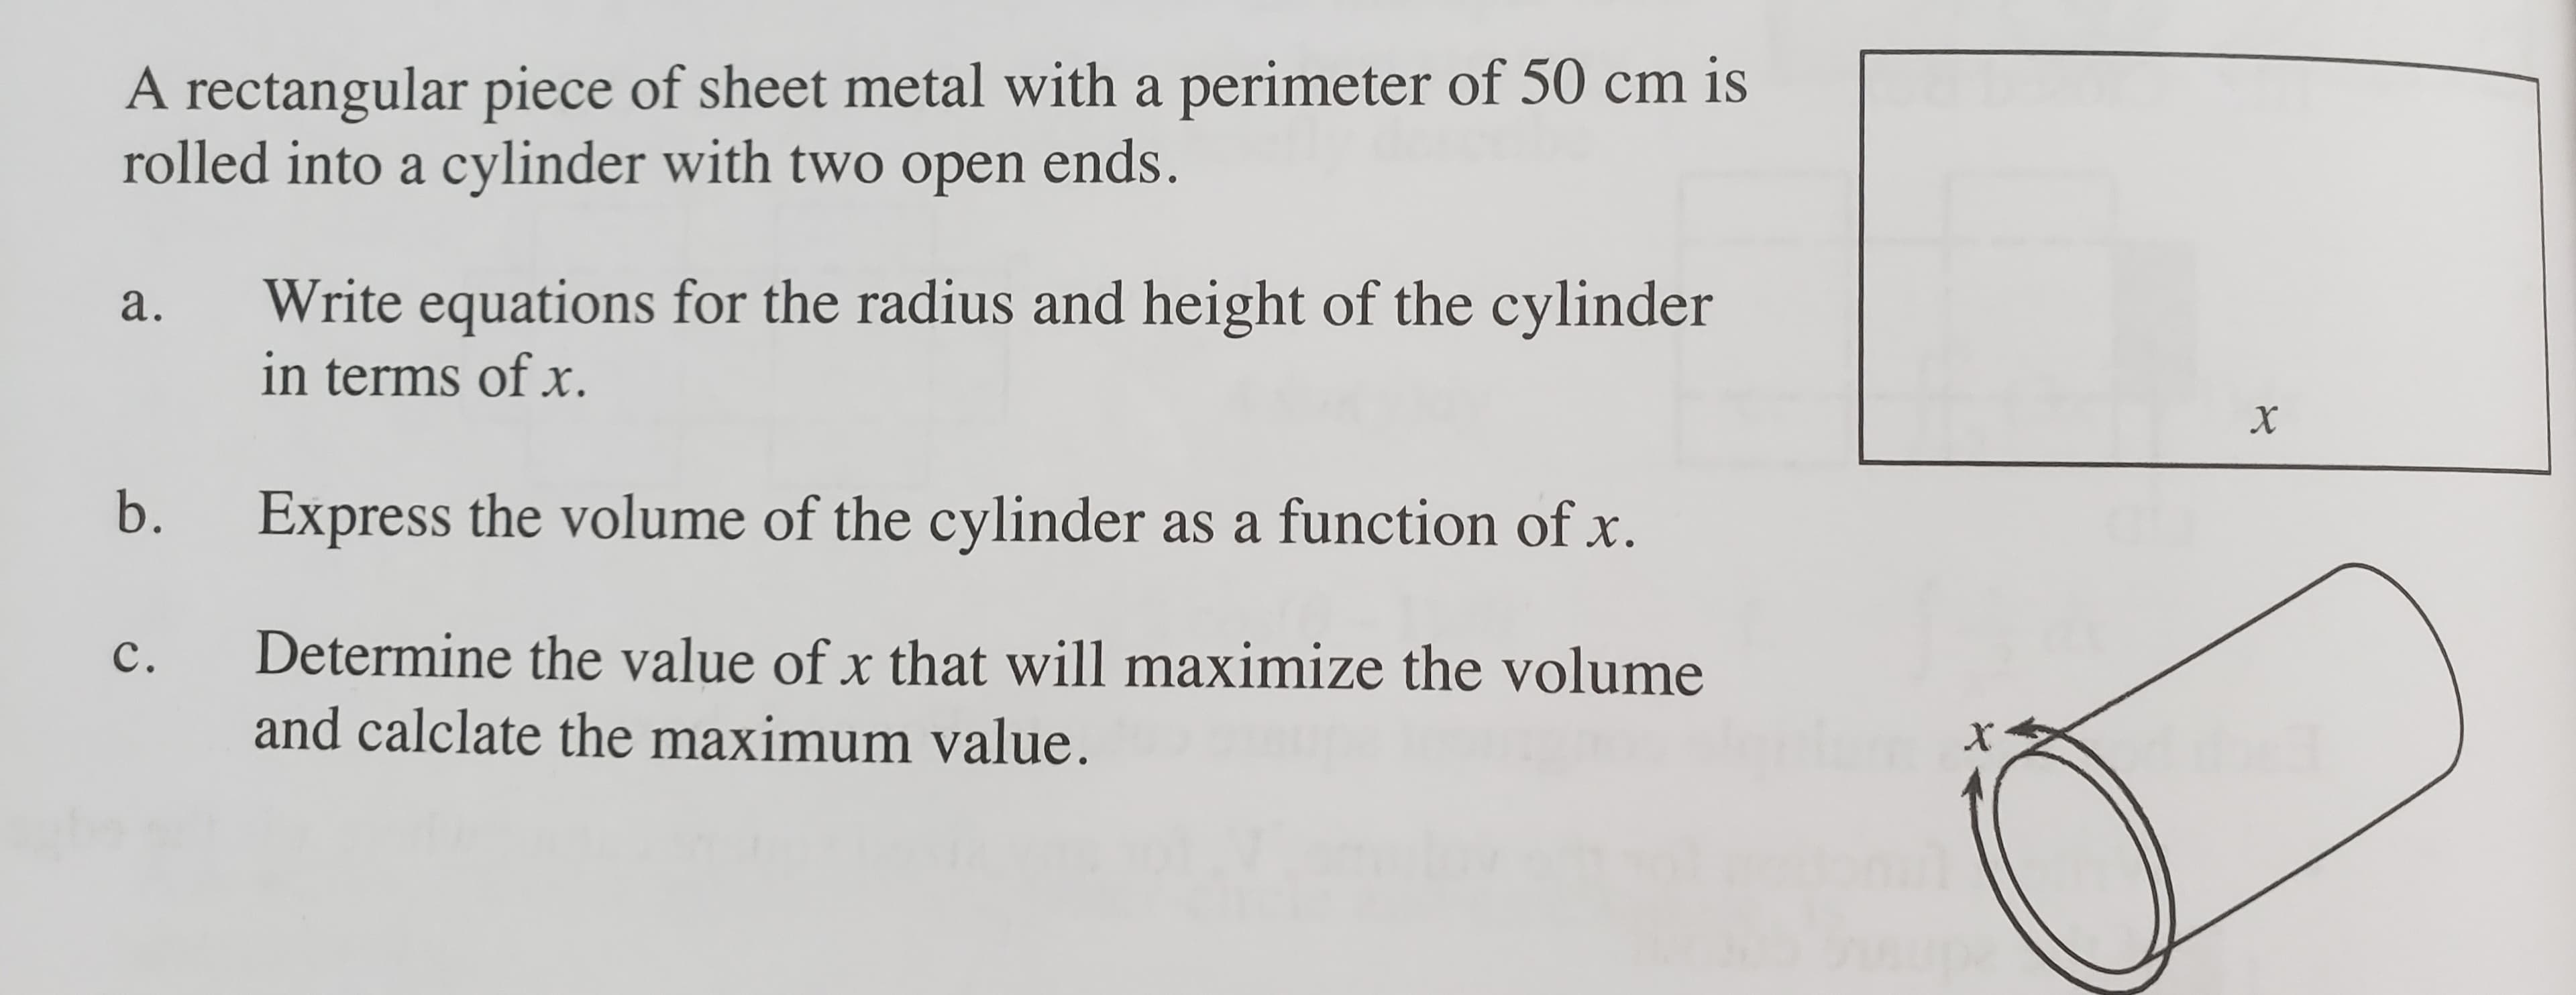 A rectangular piece of sheet metal with a perimeter of 50 cm is
rolled into a cylinder with two open ends.
Write equations for the radius and height of the cylinder
in terms of x.
а.
b.
Express the volume of the cylinder as a function of x.
с.
Determine the value of x that will maximize the volume
and calclate the maximum value.
